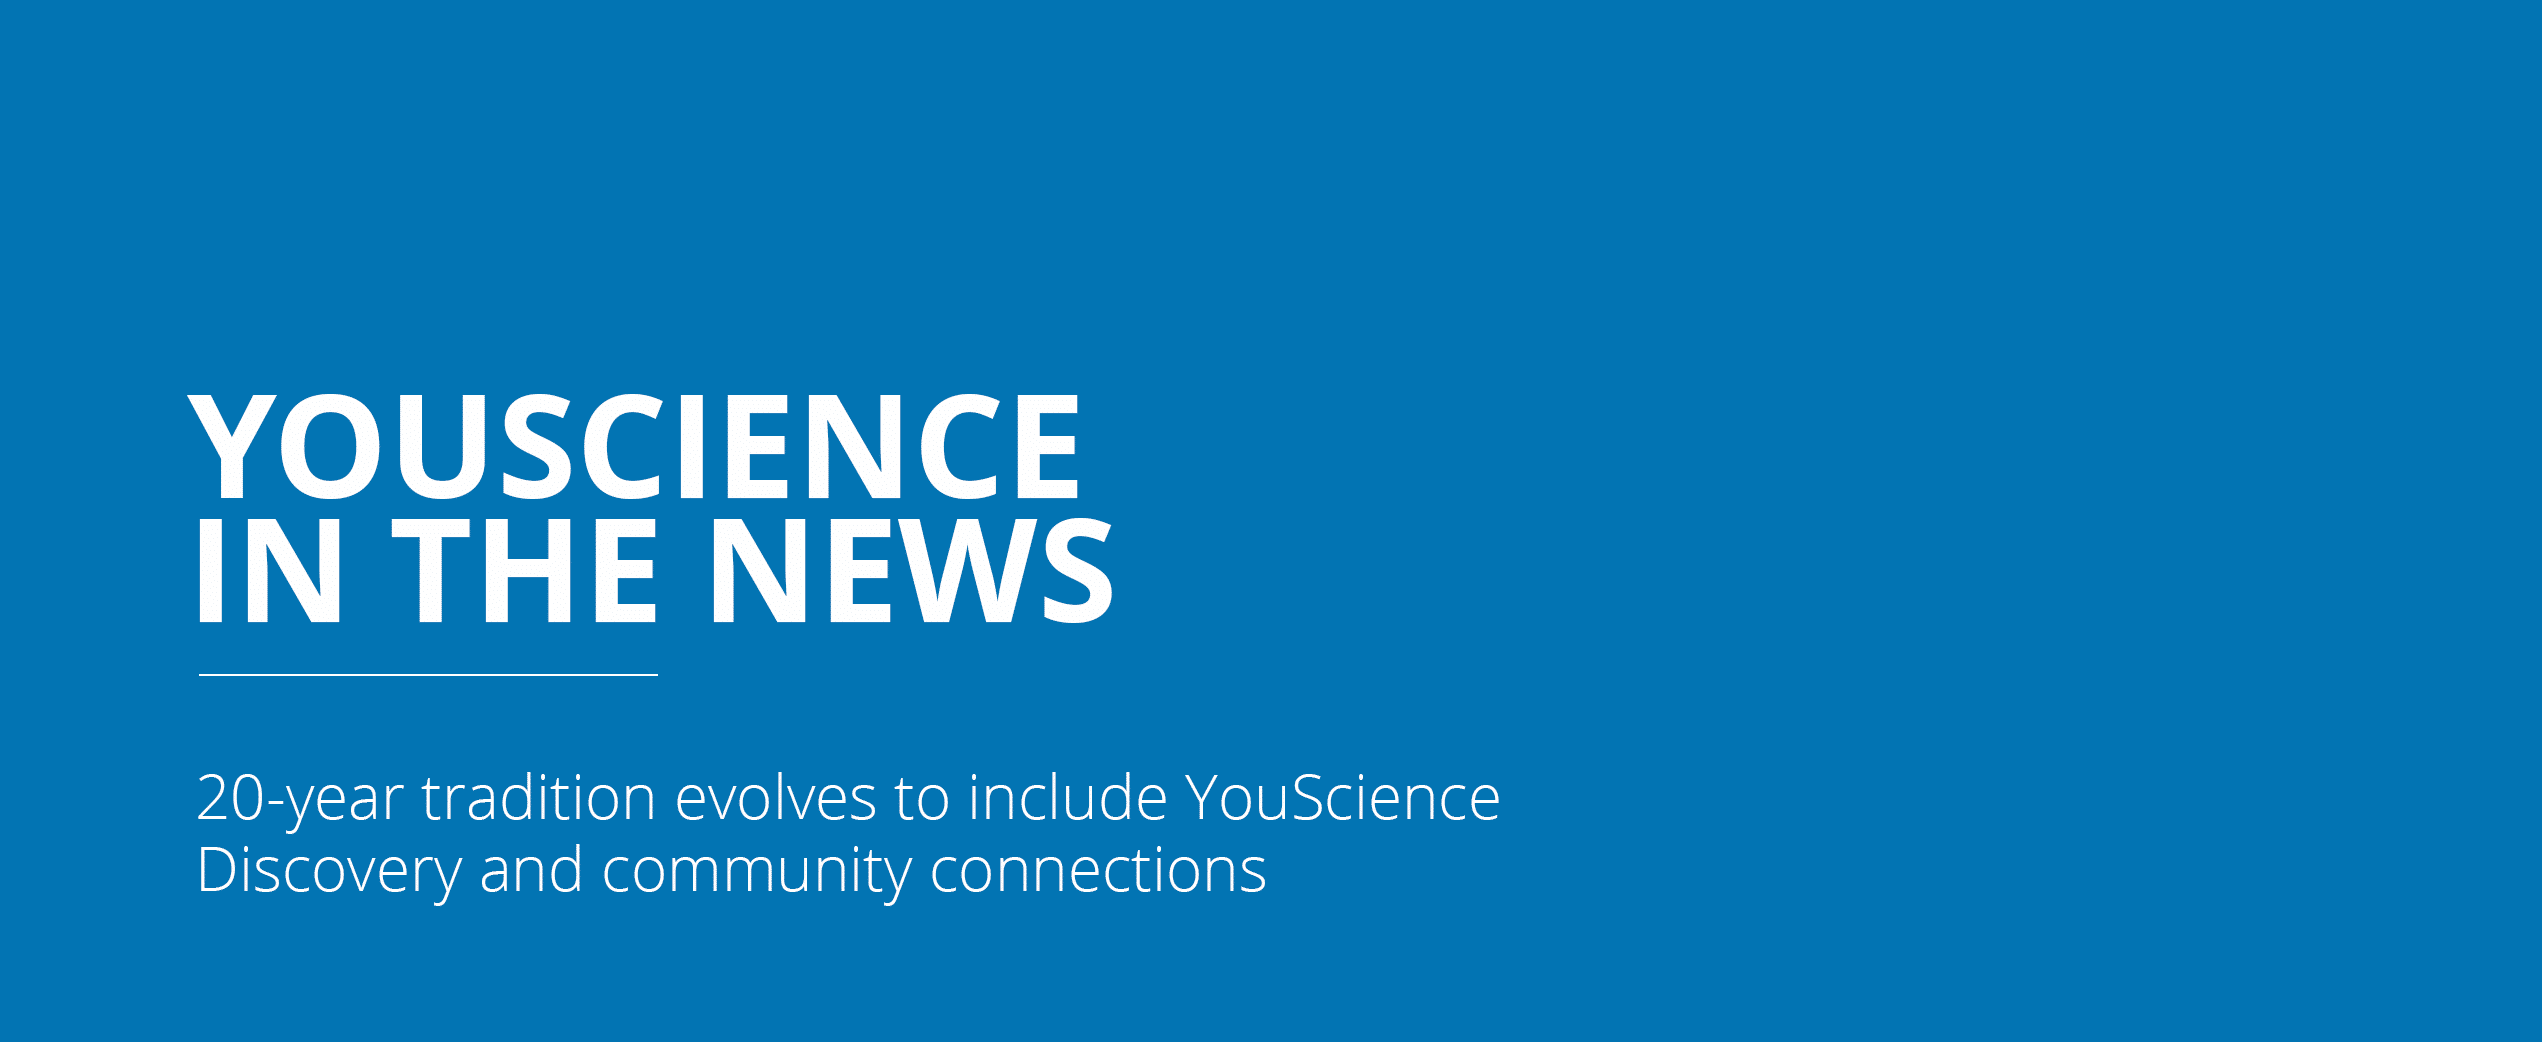 20-year tradition evolves to include YouScience Discovery and community connections